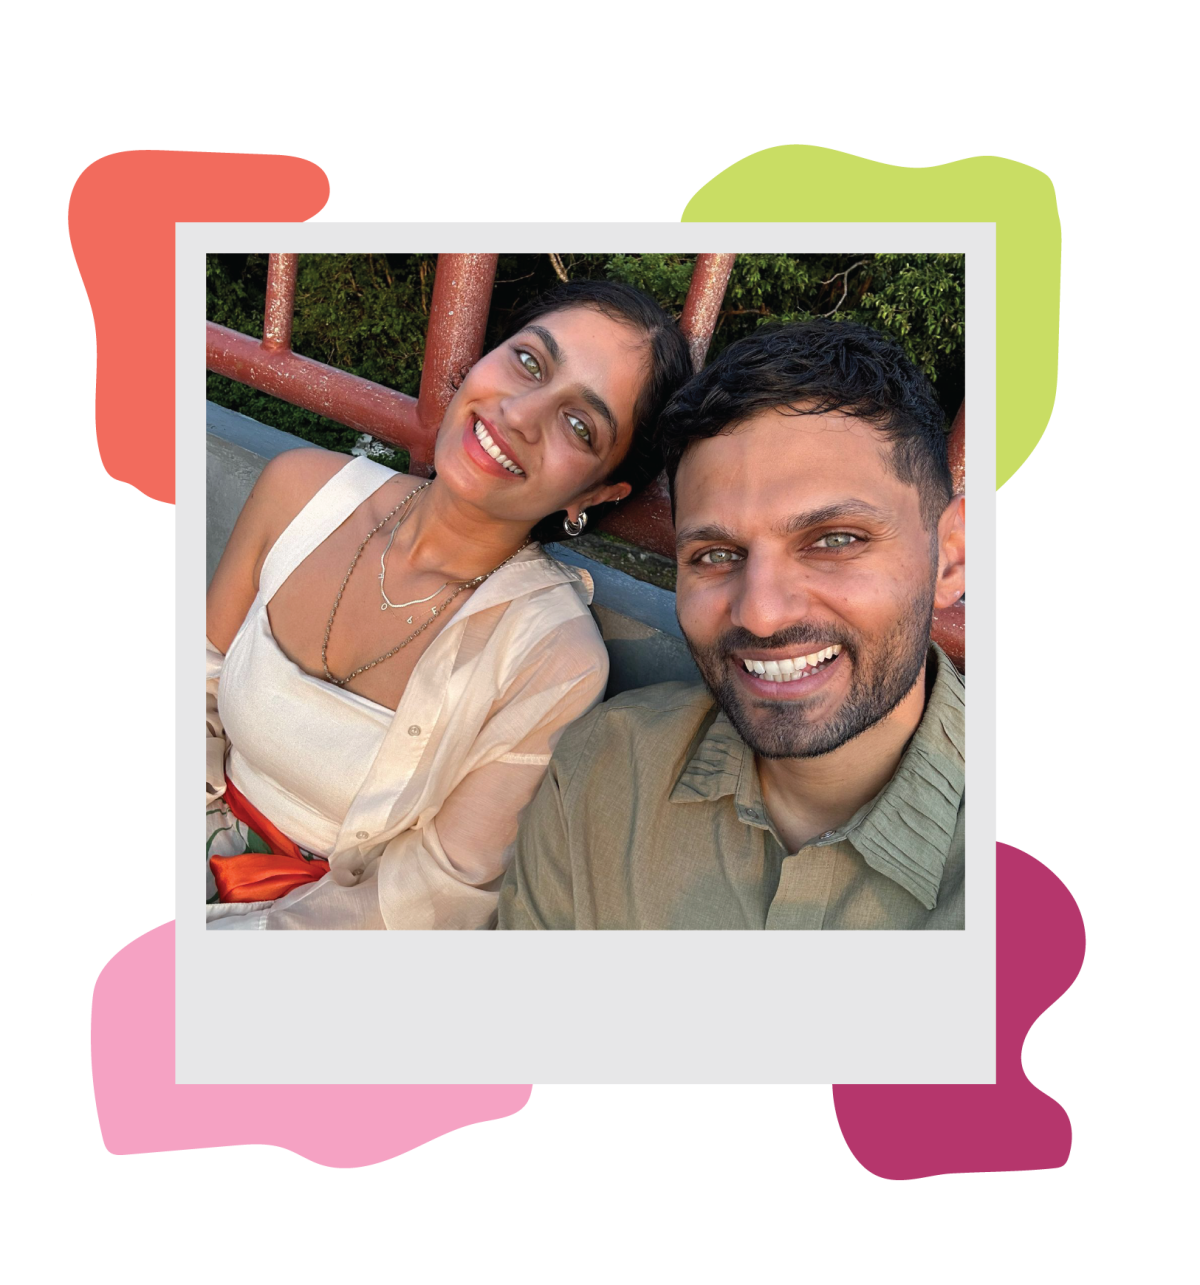 Photographic illustration in the form of a polaroid photo of a man and a woman smiling, with colored shapes behind the corners.